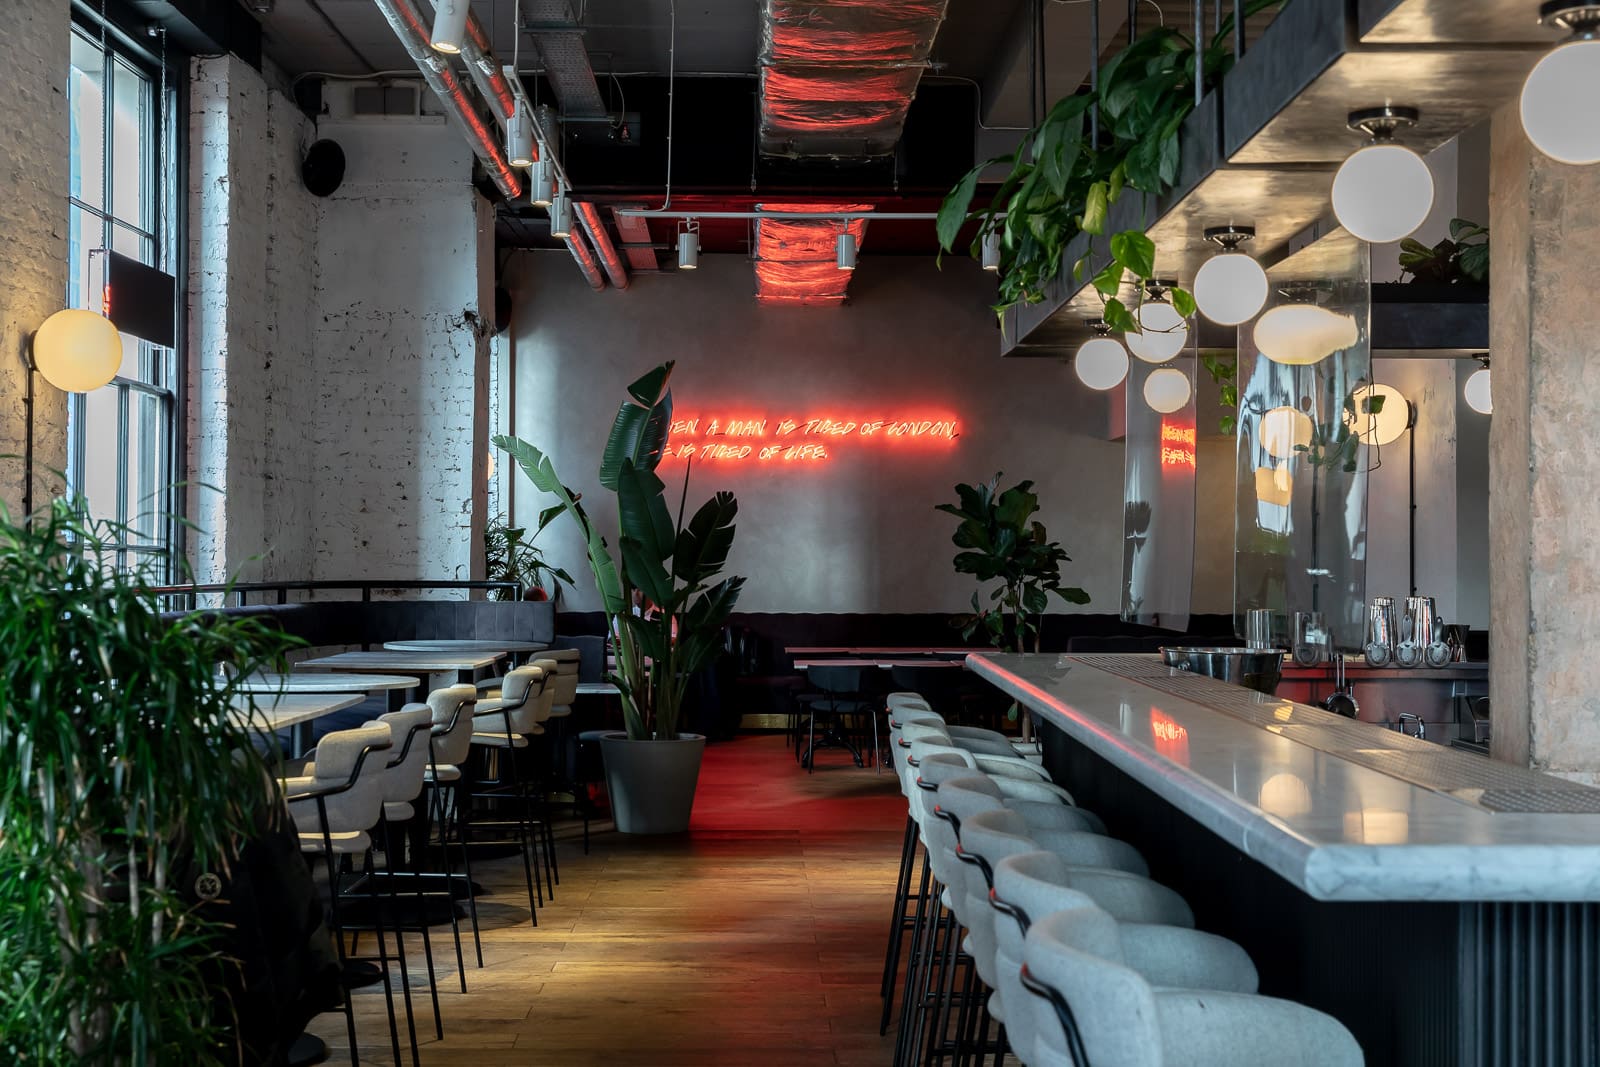 The best coffee shops in London | The inside of Grind in London Bridge has a line of chairs under a bar with greenery and a neon sign.